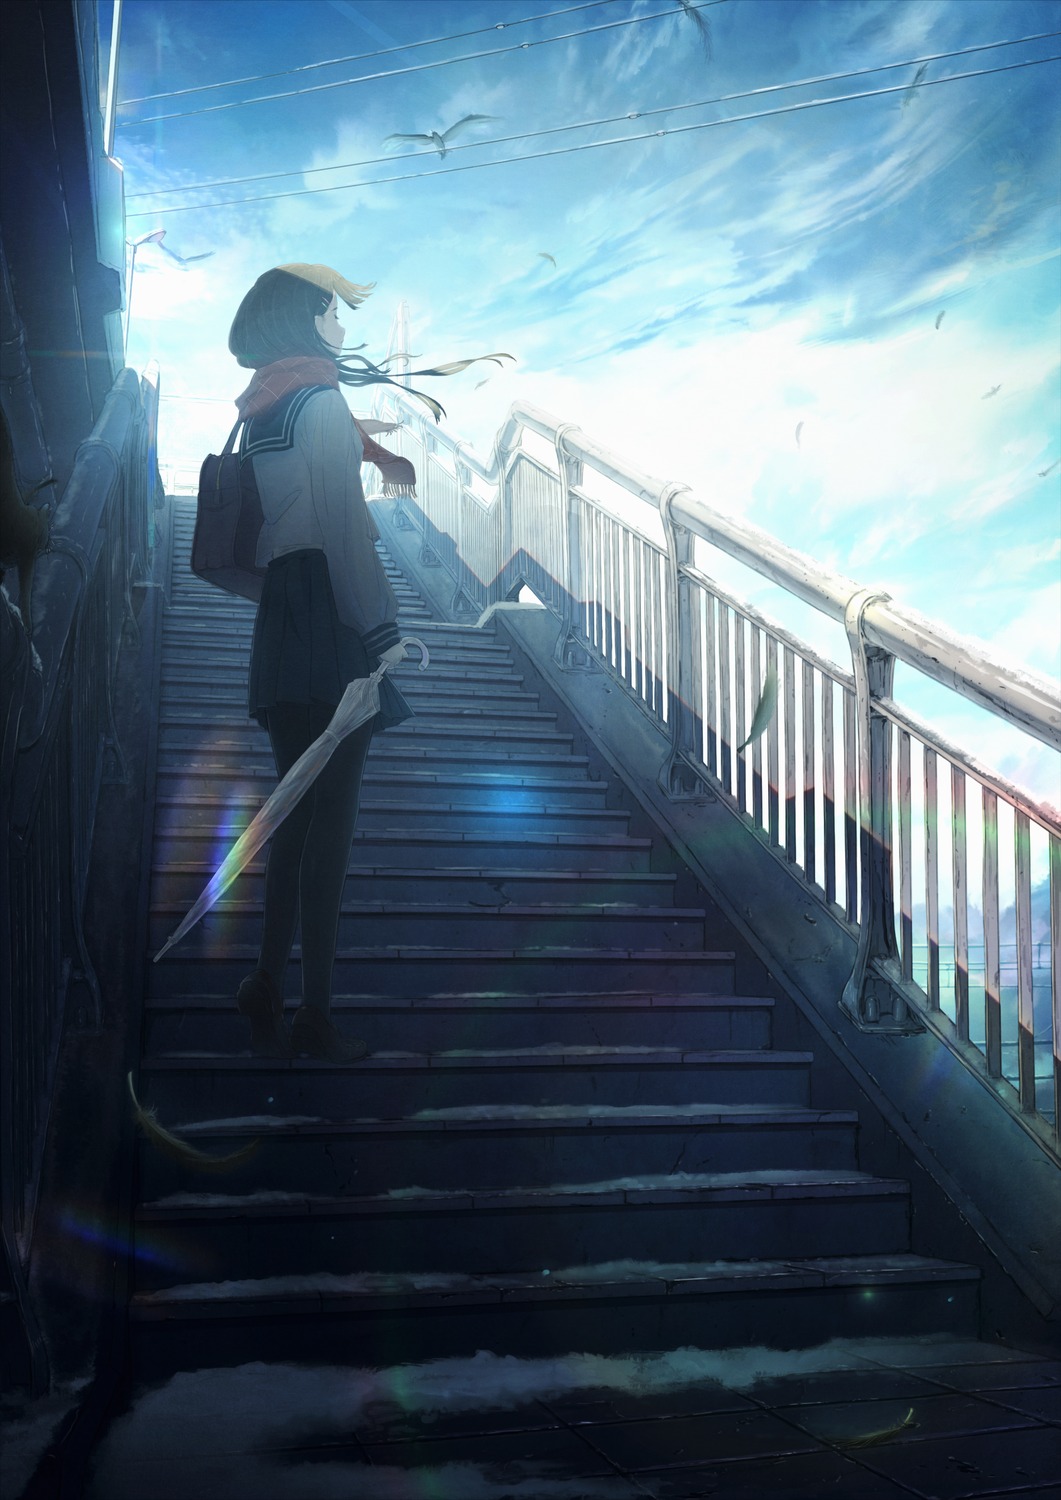 Mobile wallpaper: Anime, Stairs, Original, 968166 download the picture for  free.